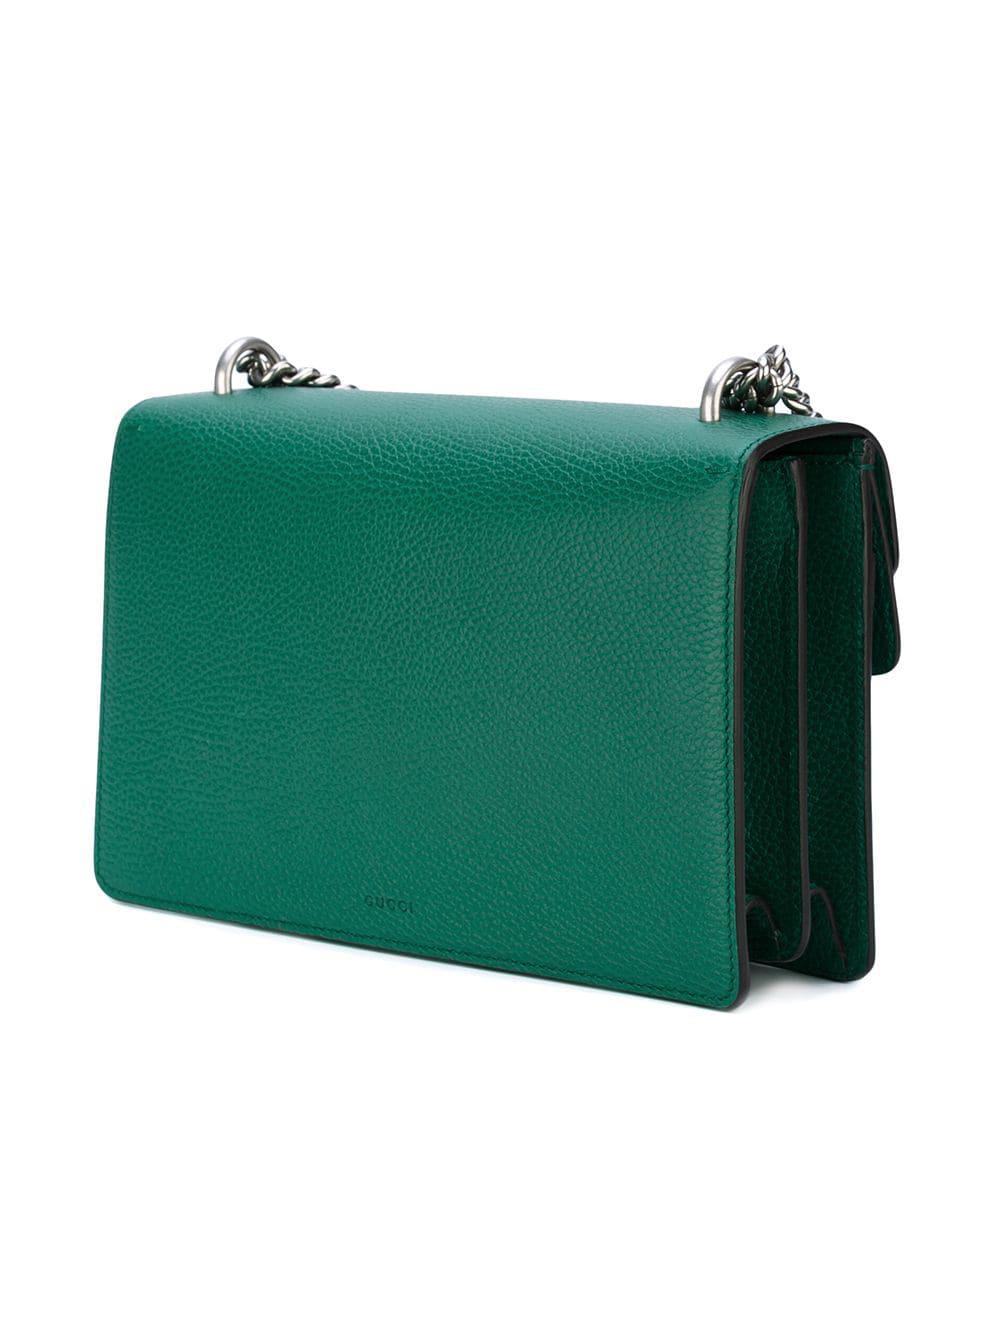 Gucci Leather Dionysus Bag in Green - Lyst